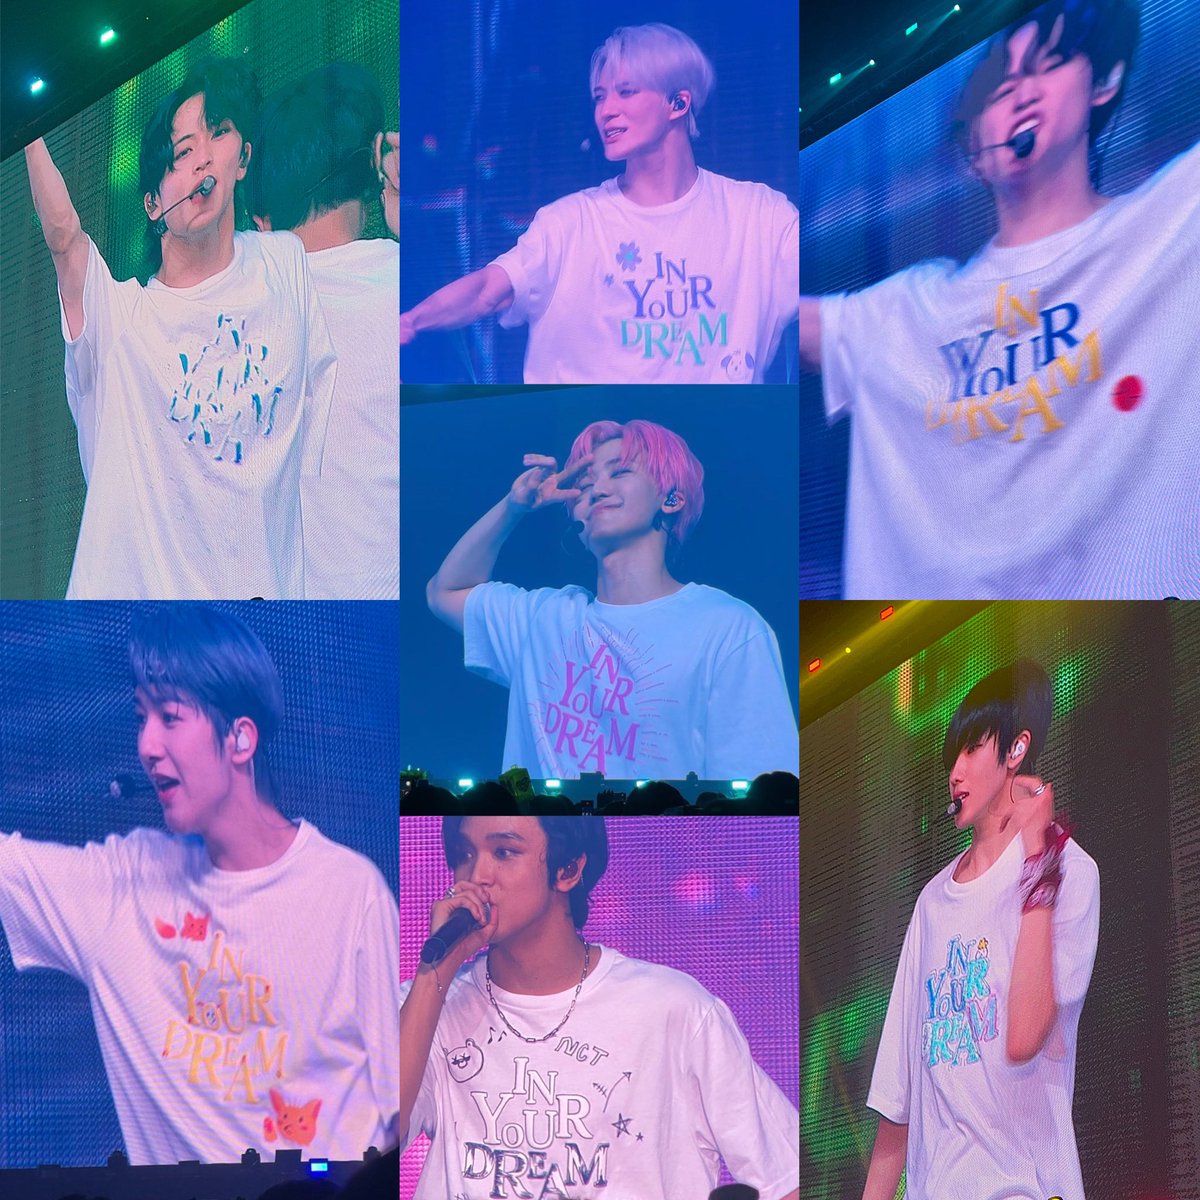 the personalized “in your dream” shirts are so pretty :(